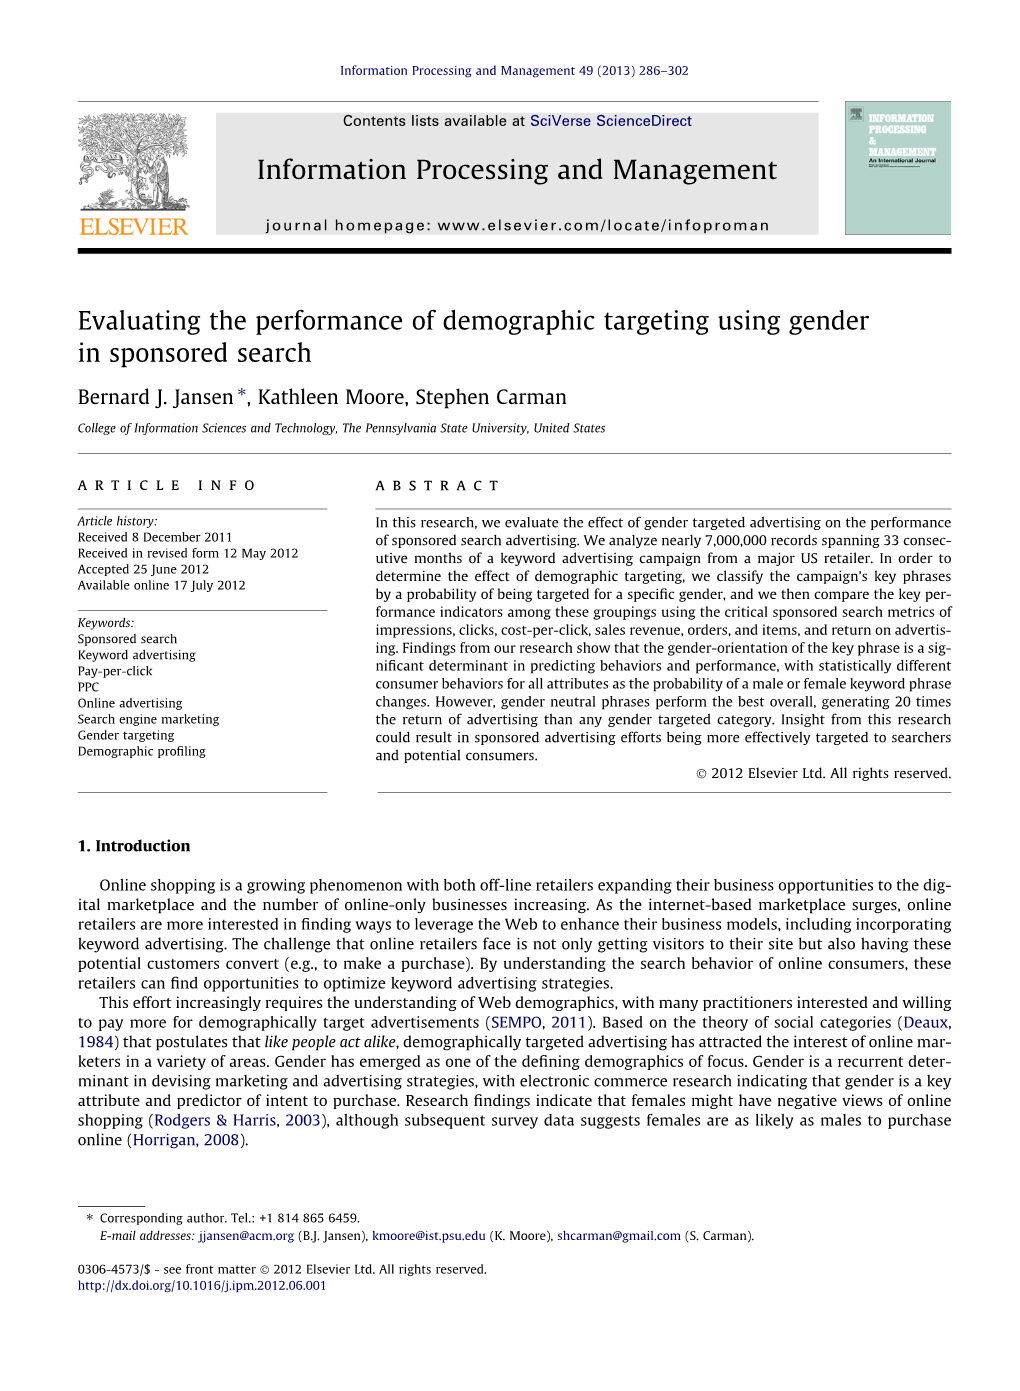 Evaluating the Performance of Demographic Targeting Using Gender in Sponsored Search ⇑ Bernard J